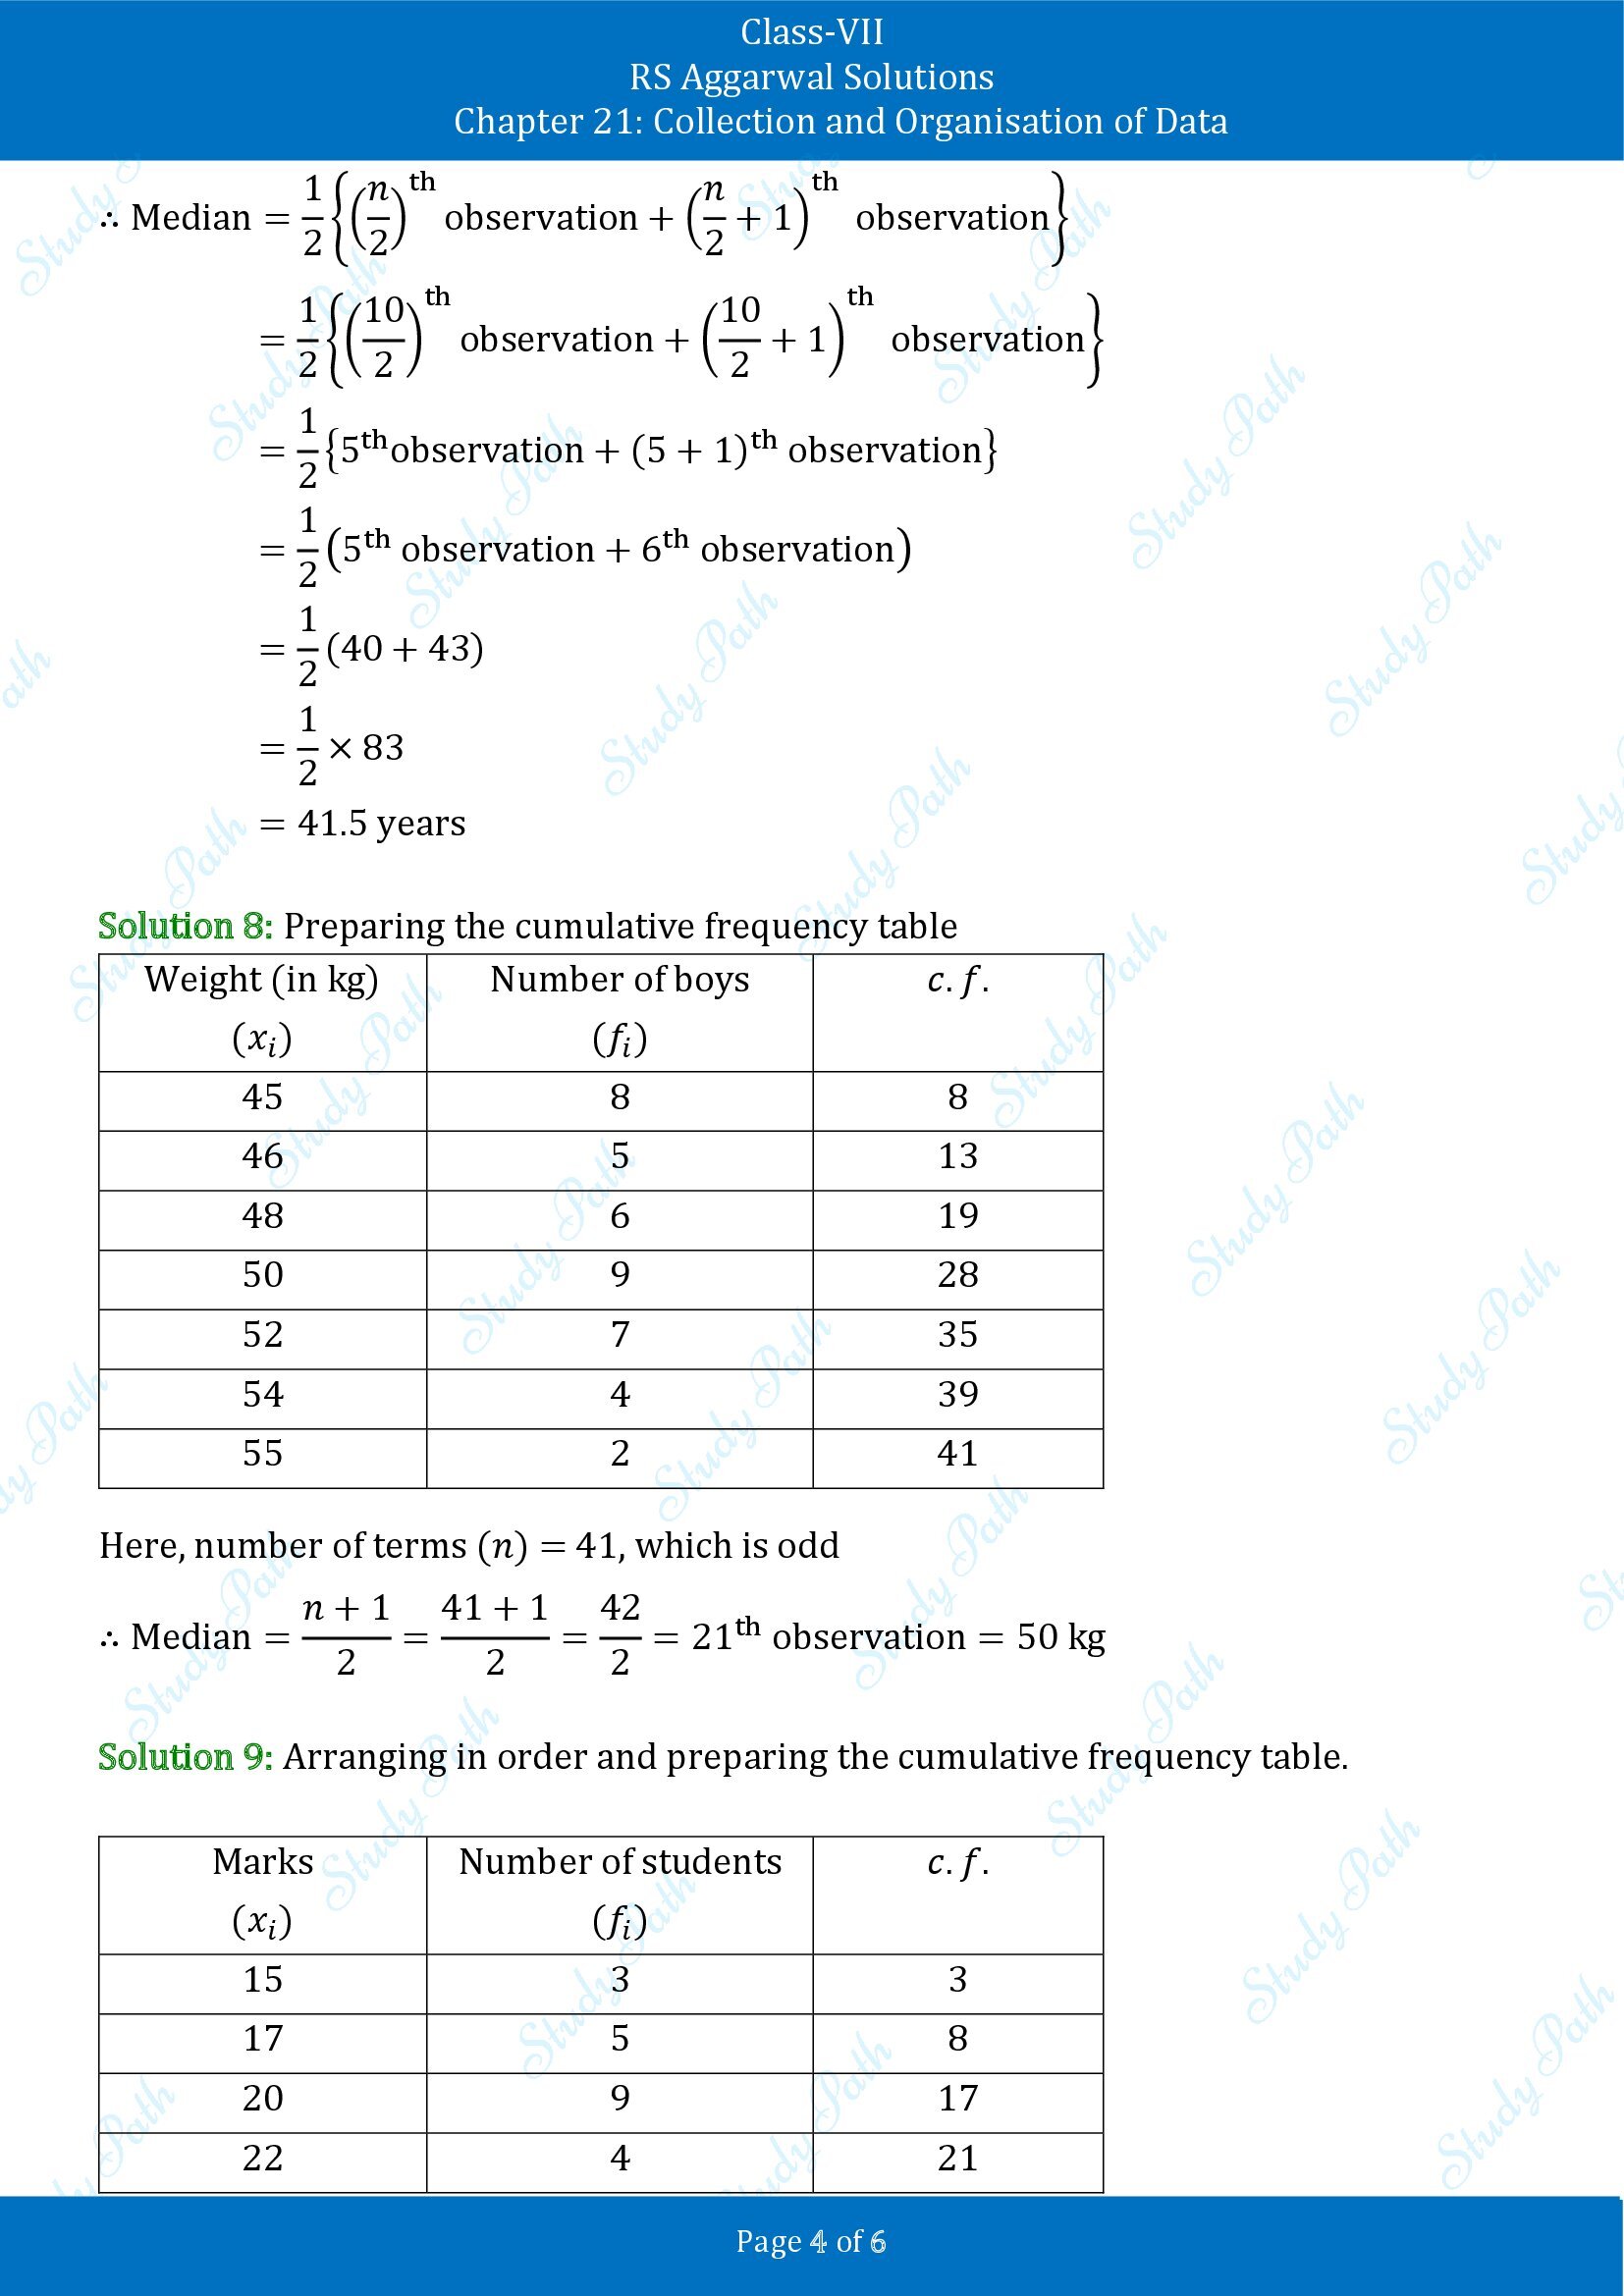 RS Aggarwal Solutions Class 7 Chapter 21 Collection and Organisation of Data Exercise 21B 00004